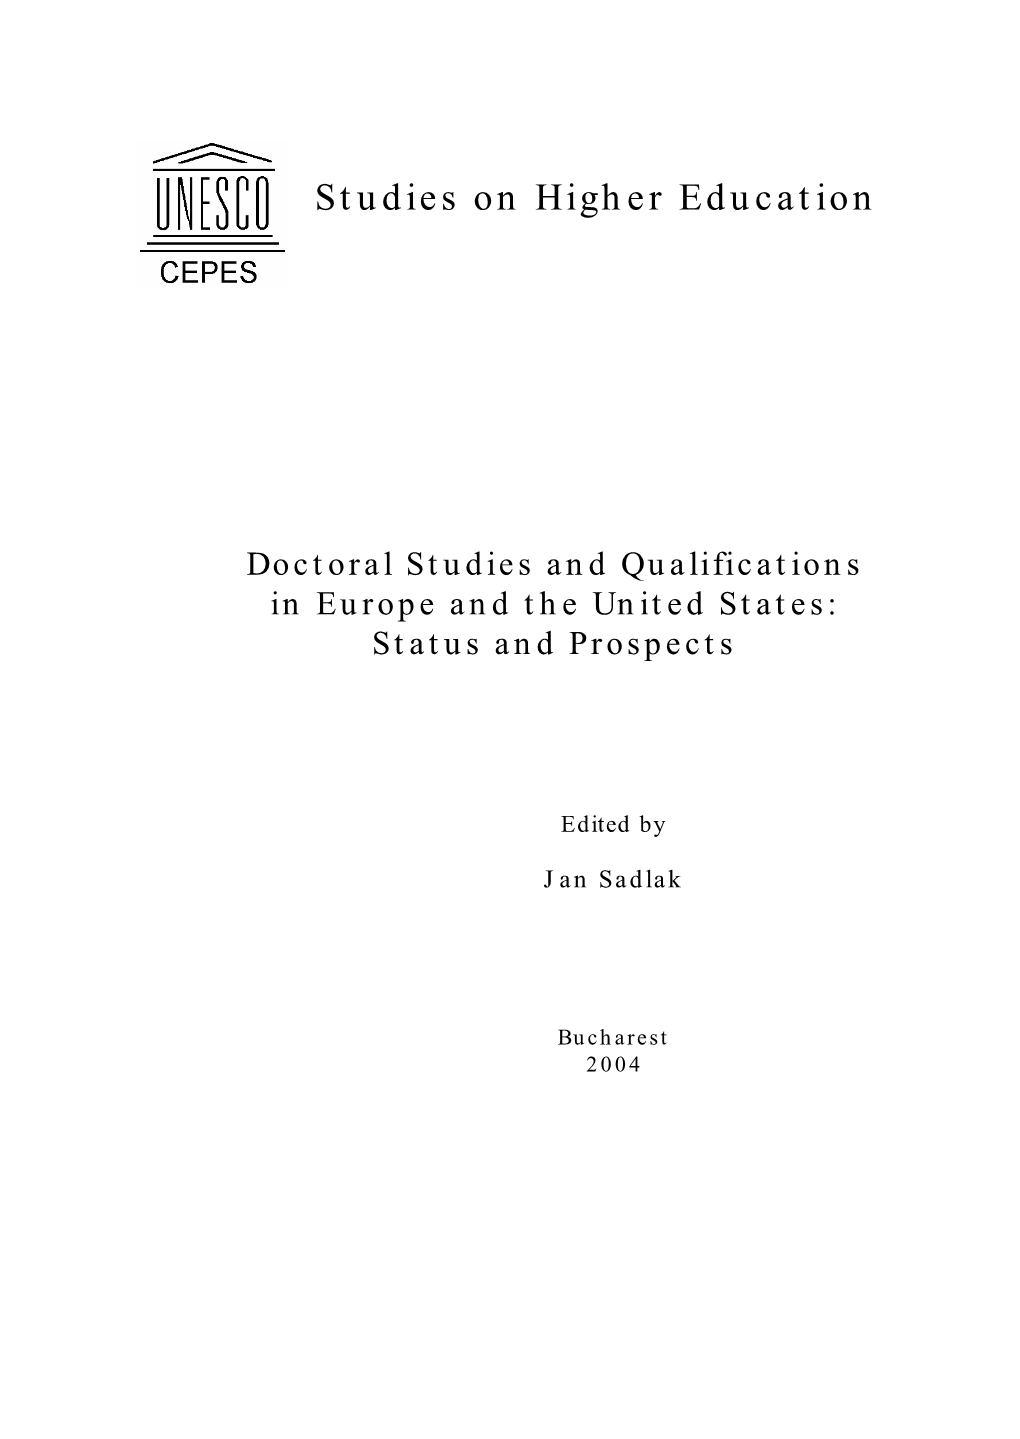 Doctoral Studies and Qualifications in Europe and the United States: Status and Prospects